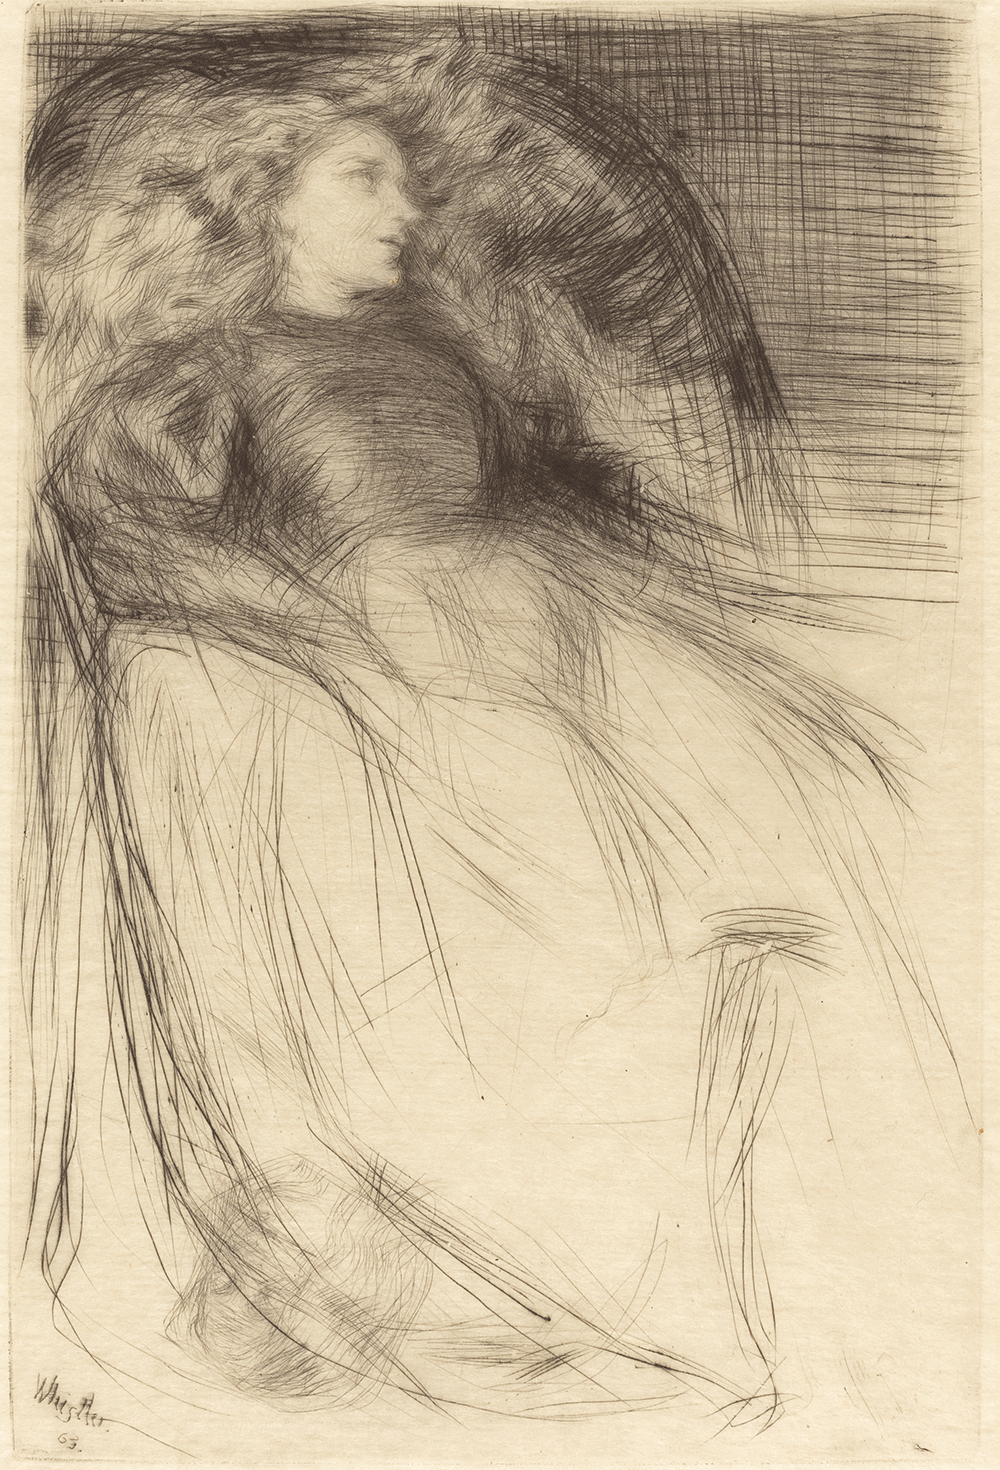 James McNeill Whistler_Weary, 1863_5158-031_W